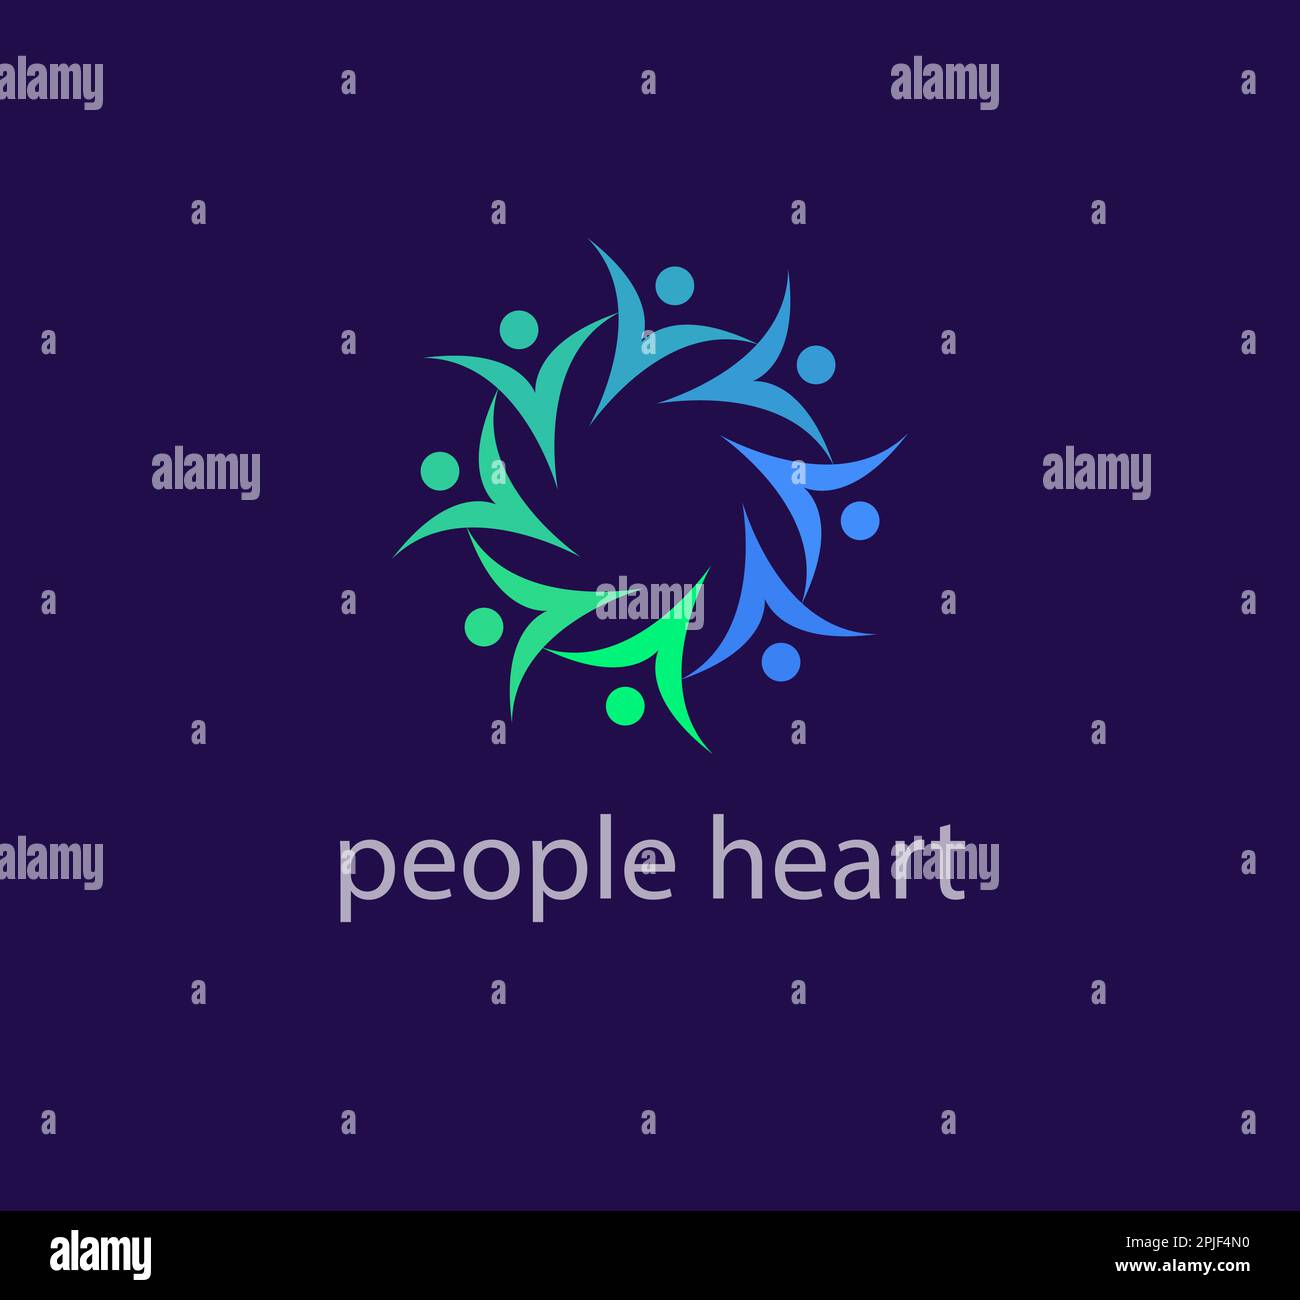 Idea of teamwork from heart and solidarity from people logo. Unique color transitions. people logo template. vector. Stock Vector